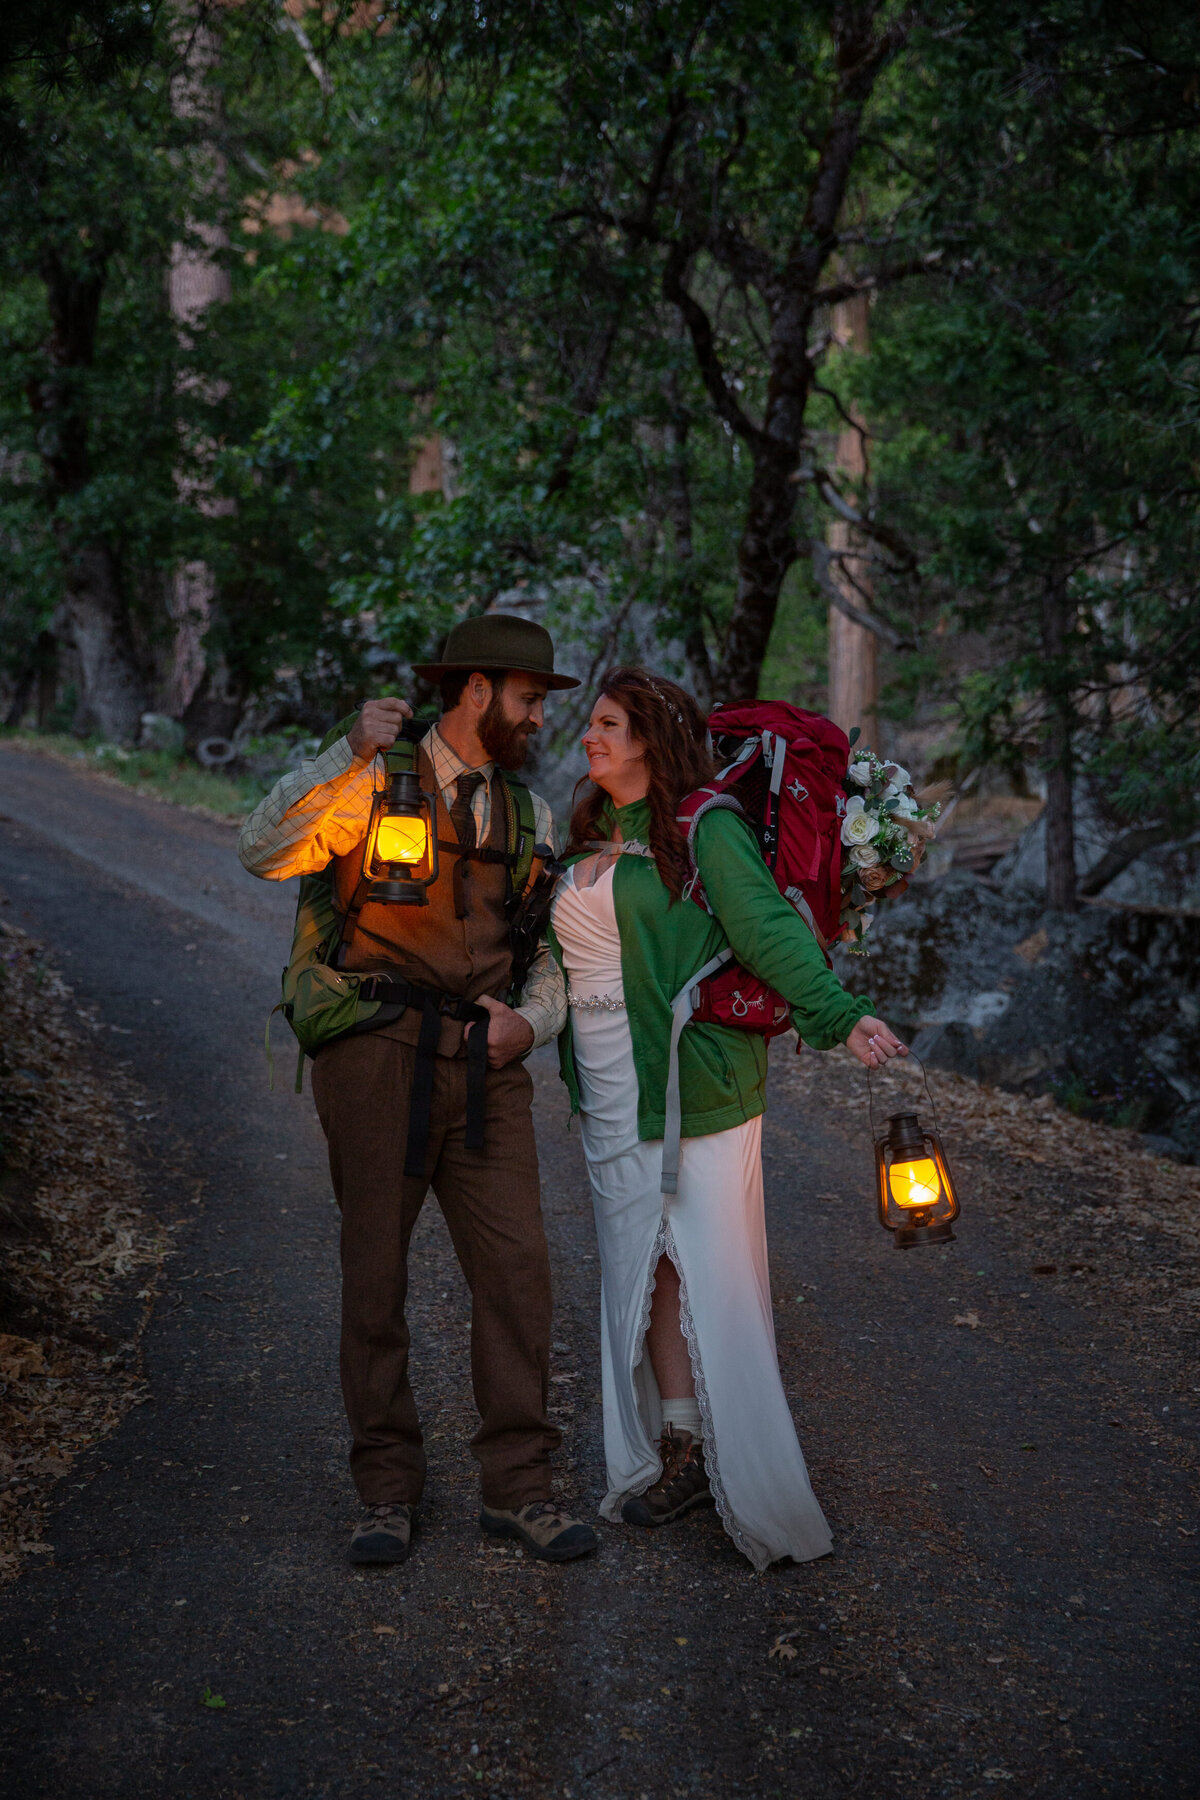 A bride and groom are wearing backpacks and standing on a paved path holding lanterns around them as the sunsets.